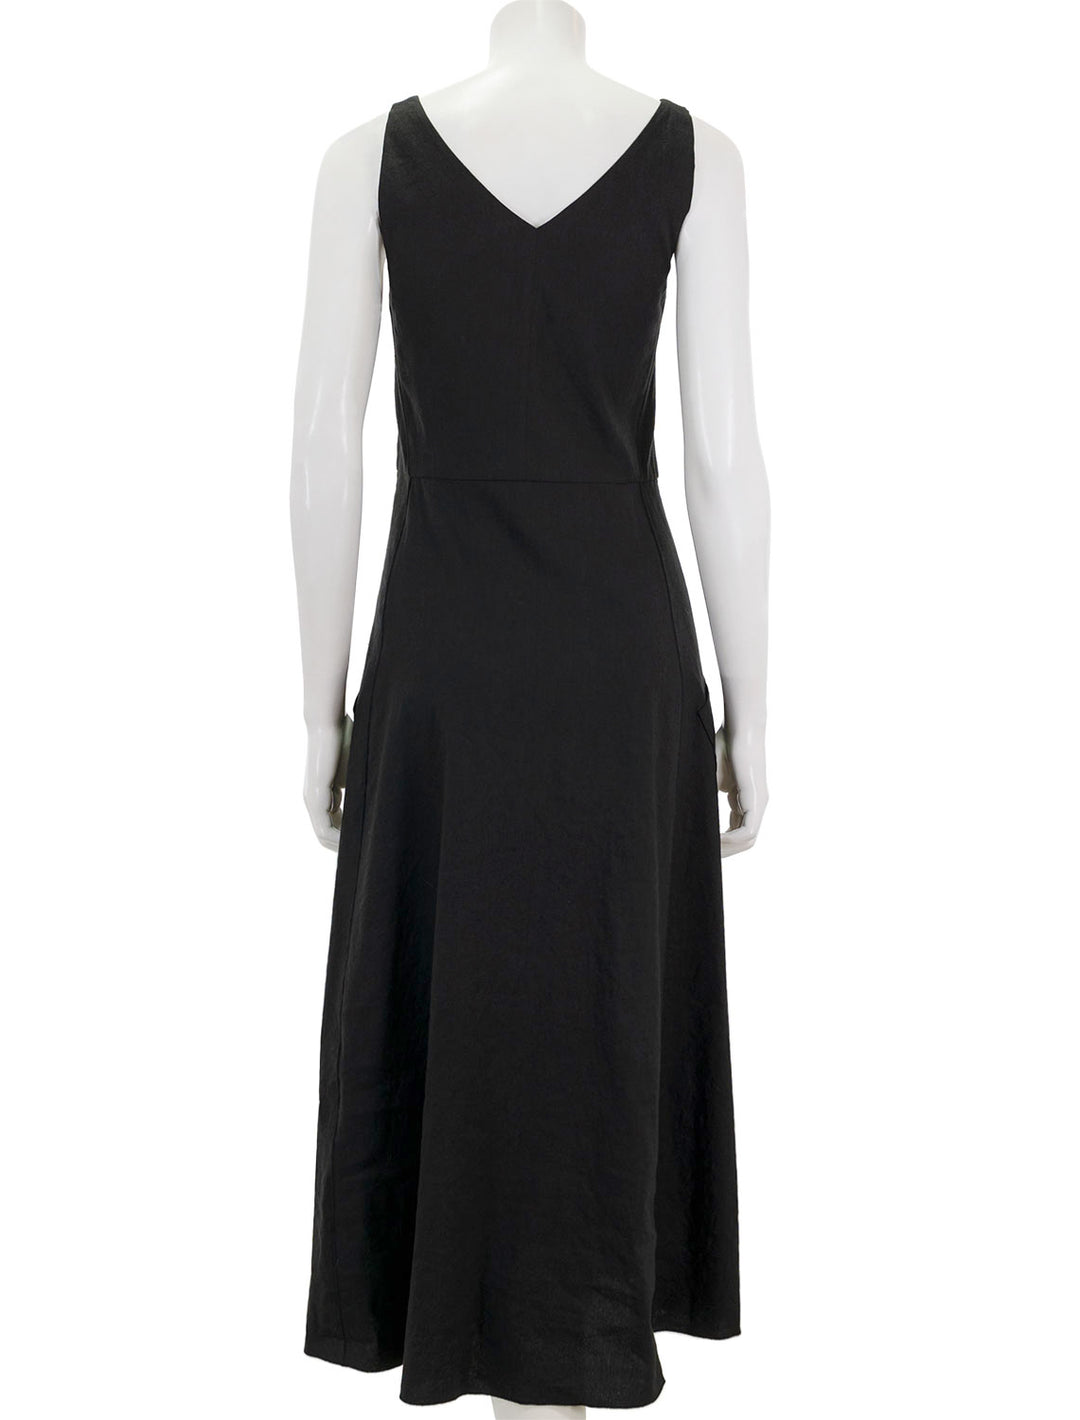 Back view of Vince's relaxed v neck pocketed dress in black.